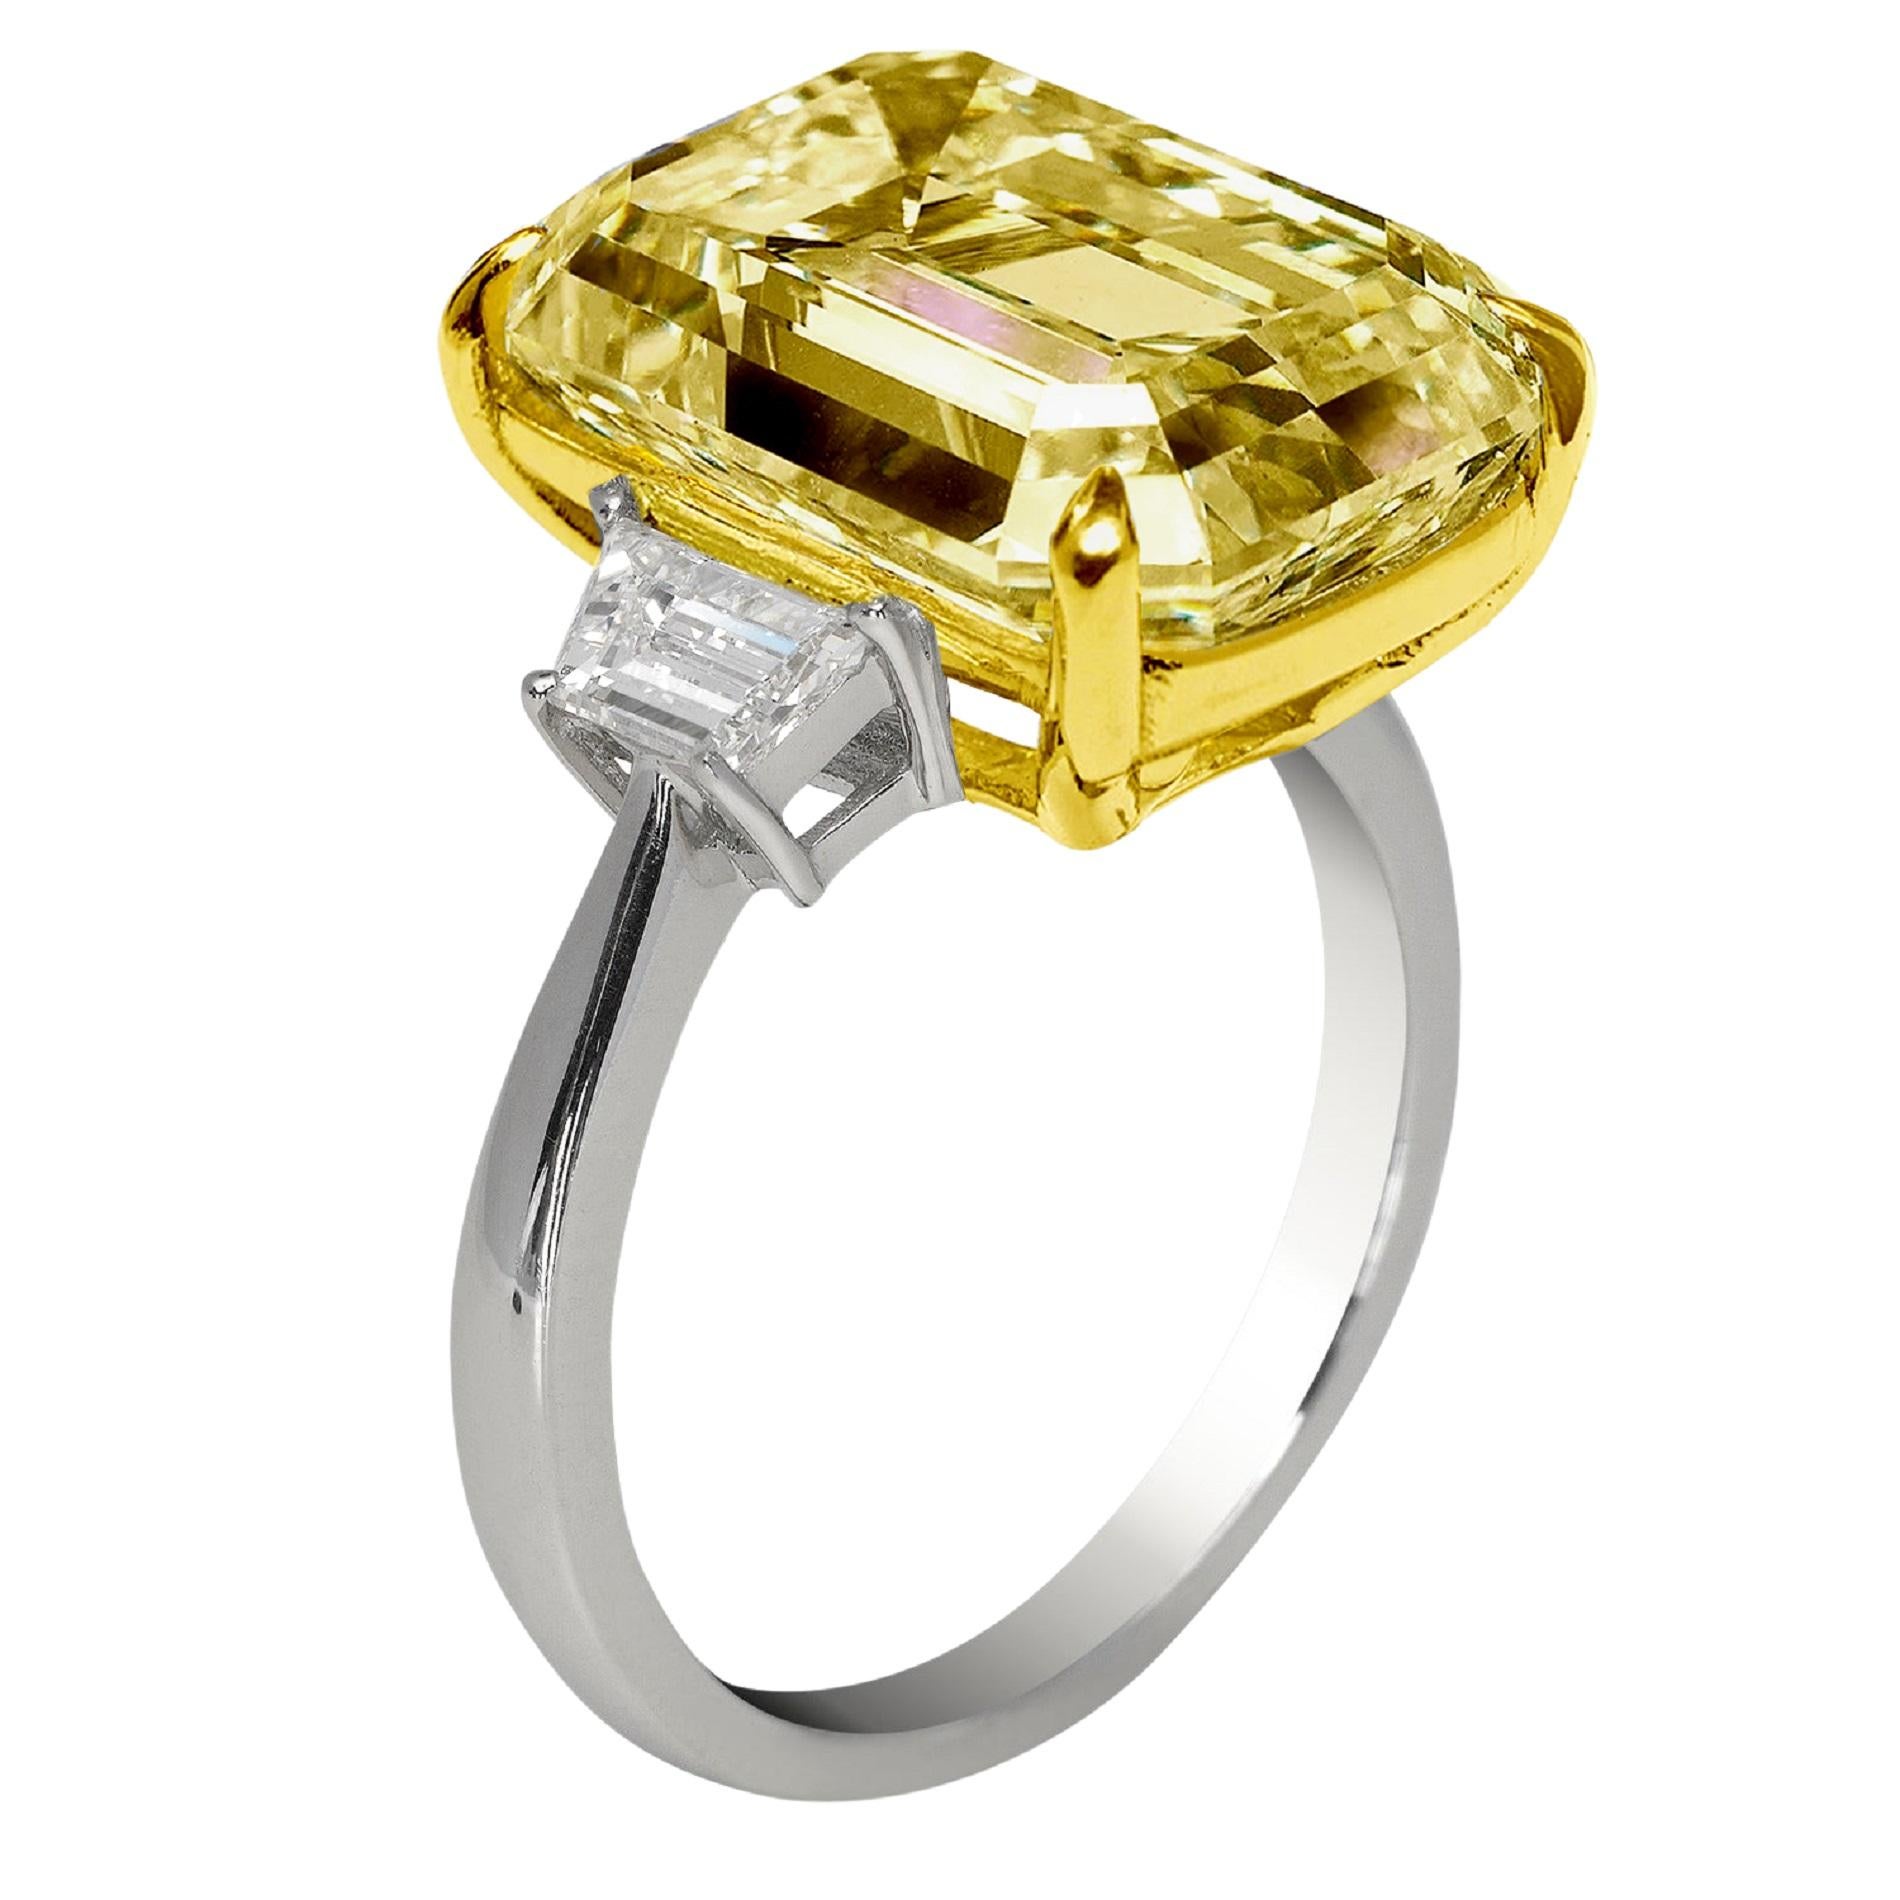 Contemporary GIA Certified 5 Carat Fancy Yellow Emerald Cut Diamond Ring For Sale